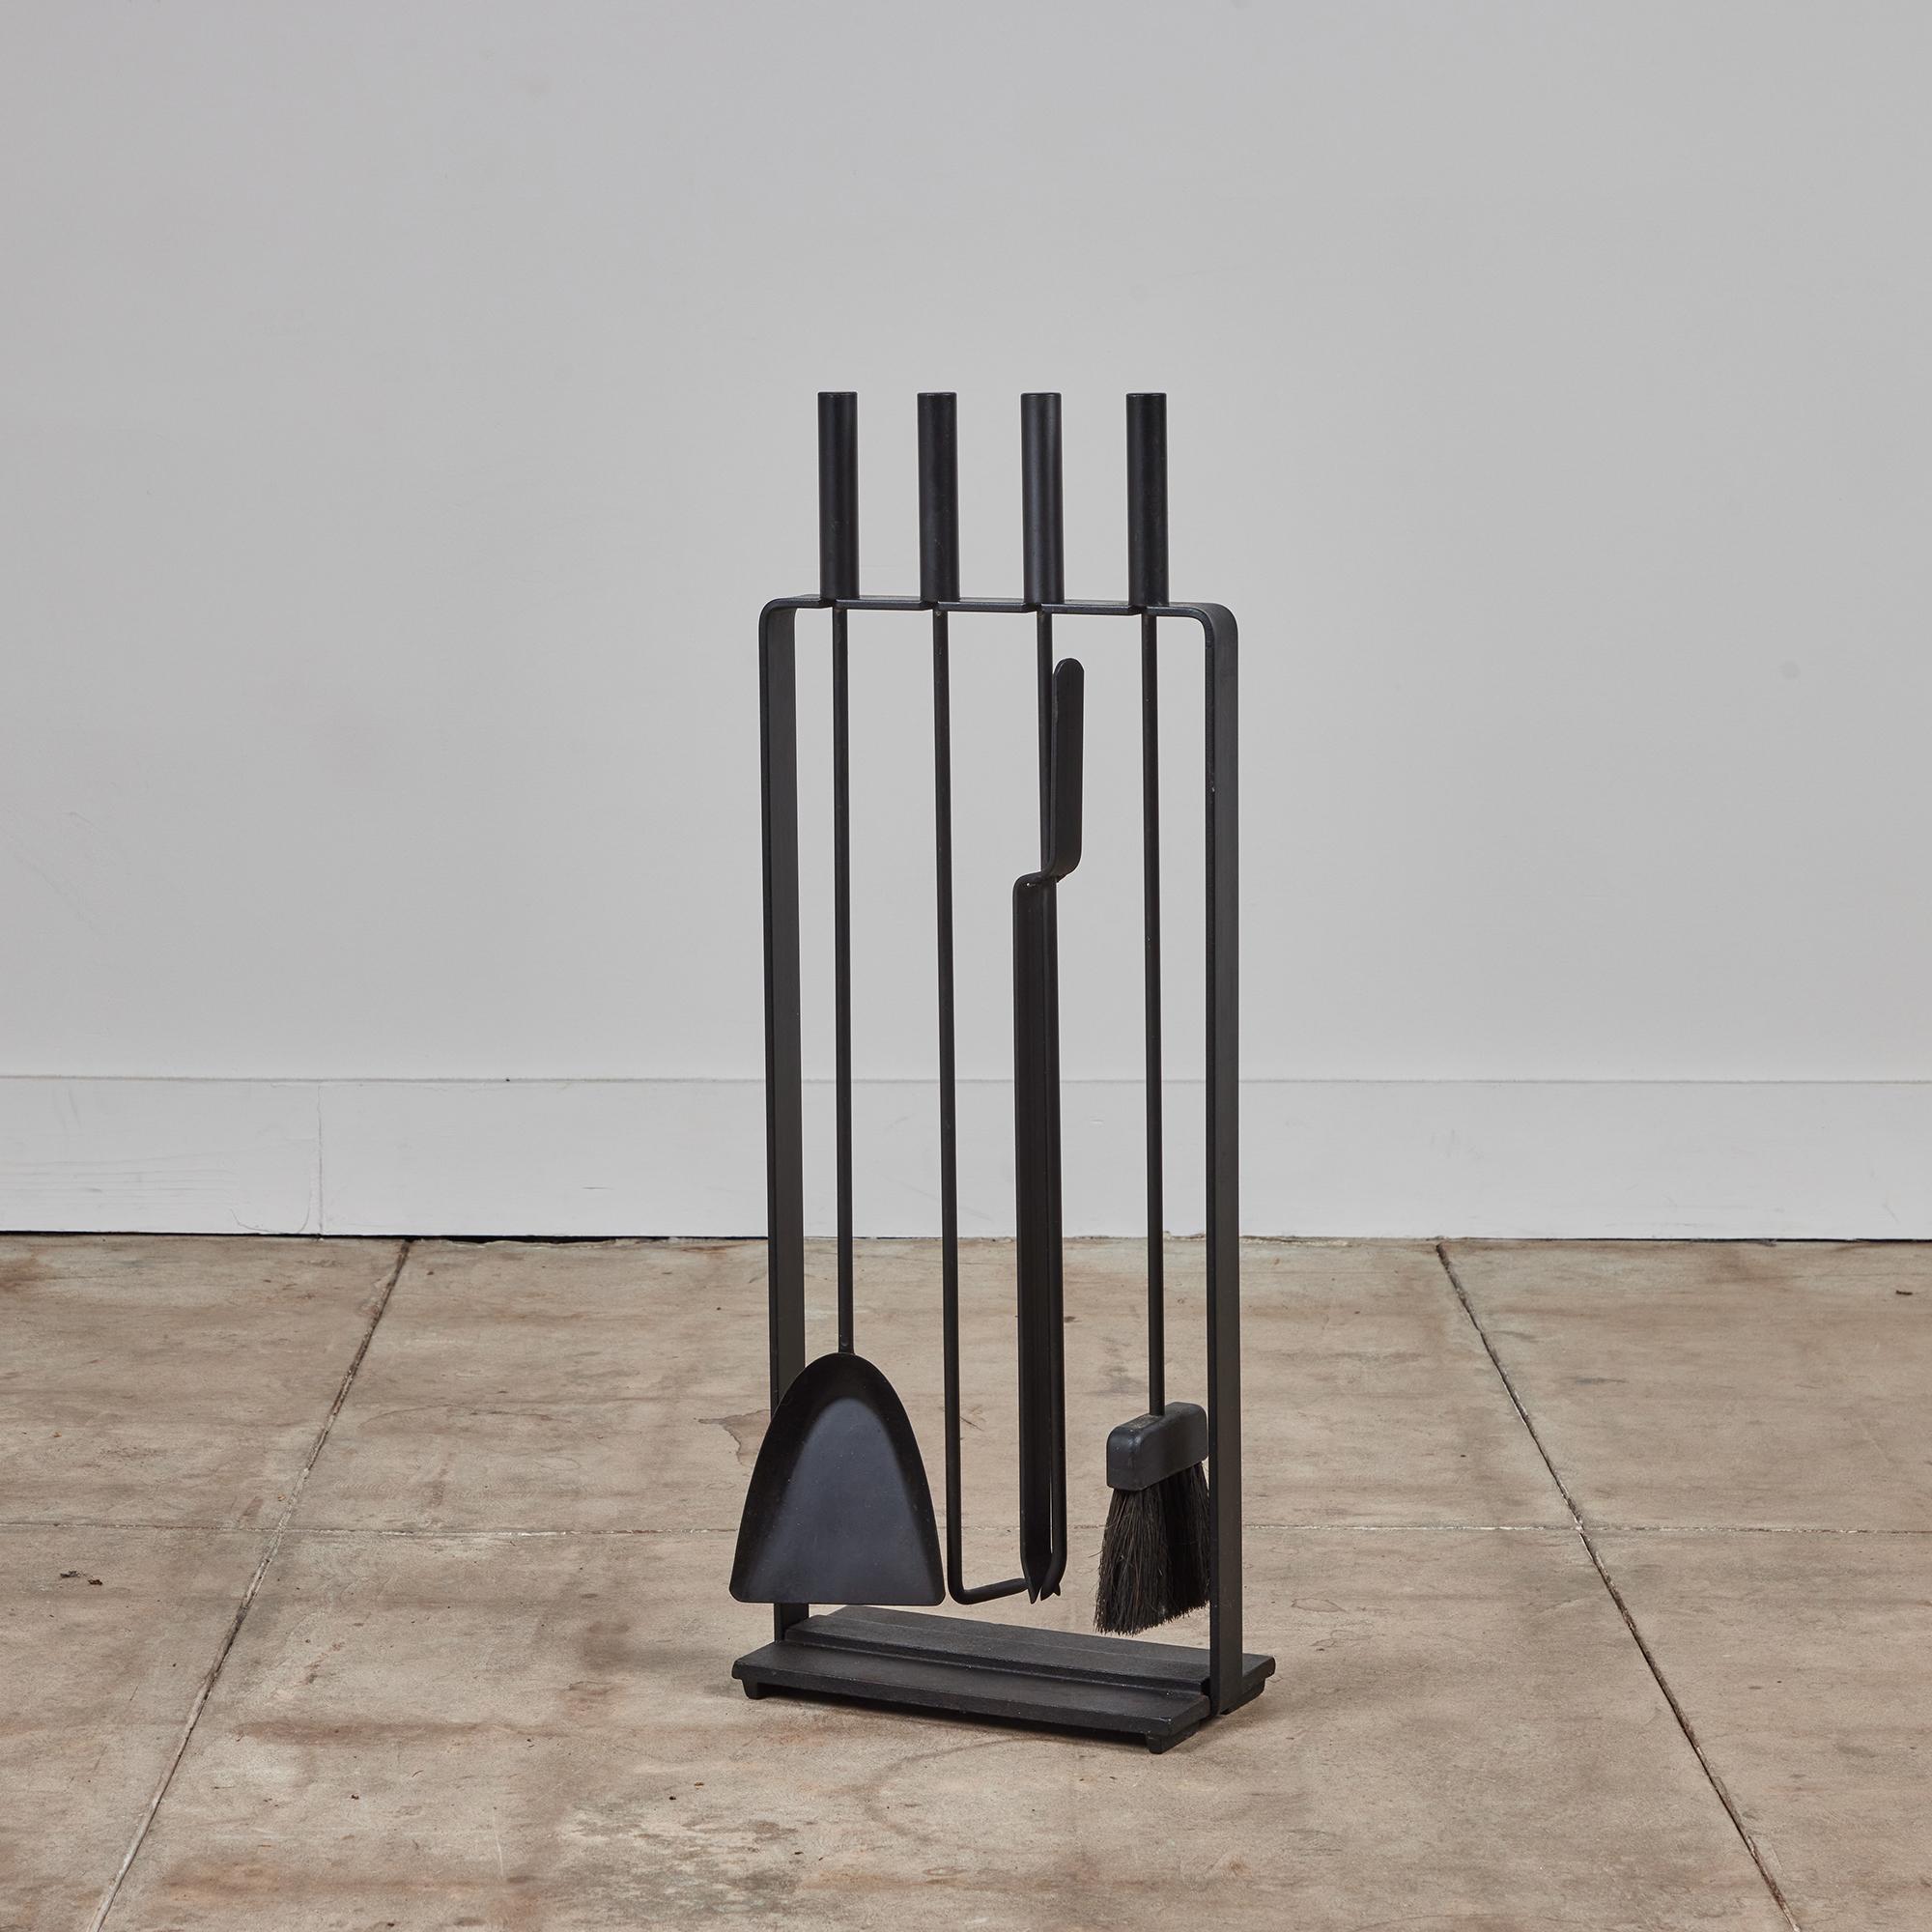 A five piece set of Pilgrim fireplace tools with stand, USA, c.1950s. The set features four tools with cylindrical handles and comes with a matching stand. All elements are made of blackened iron. This modernist piece shows off clean and minimal